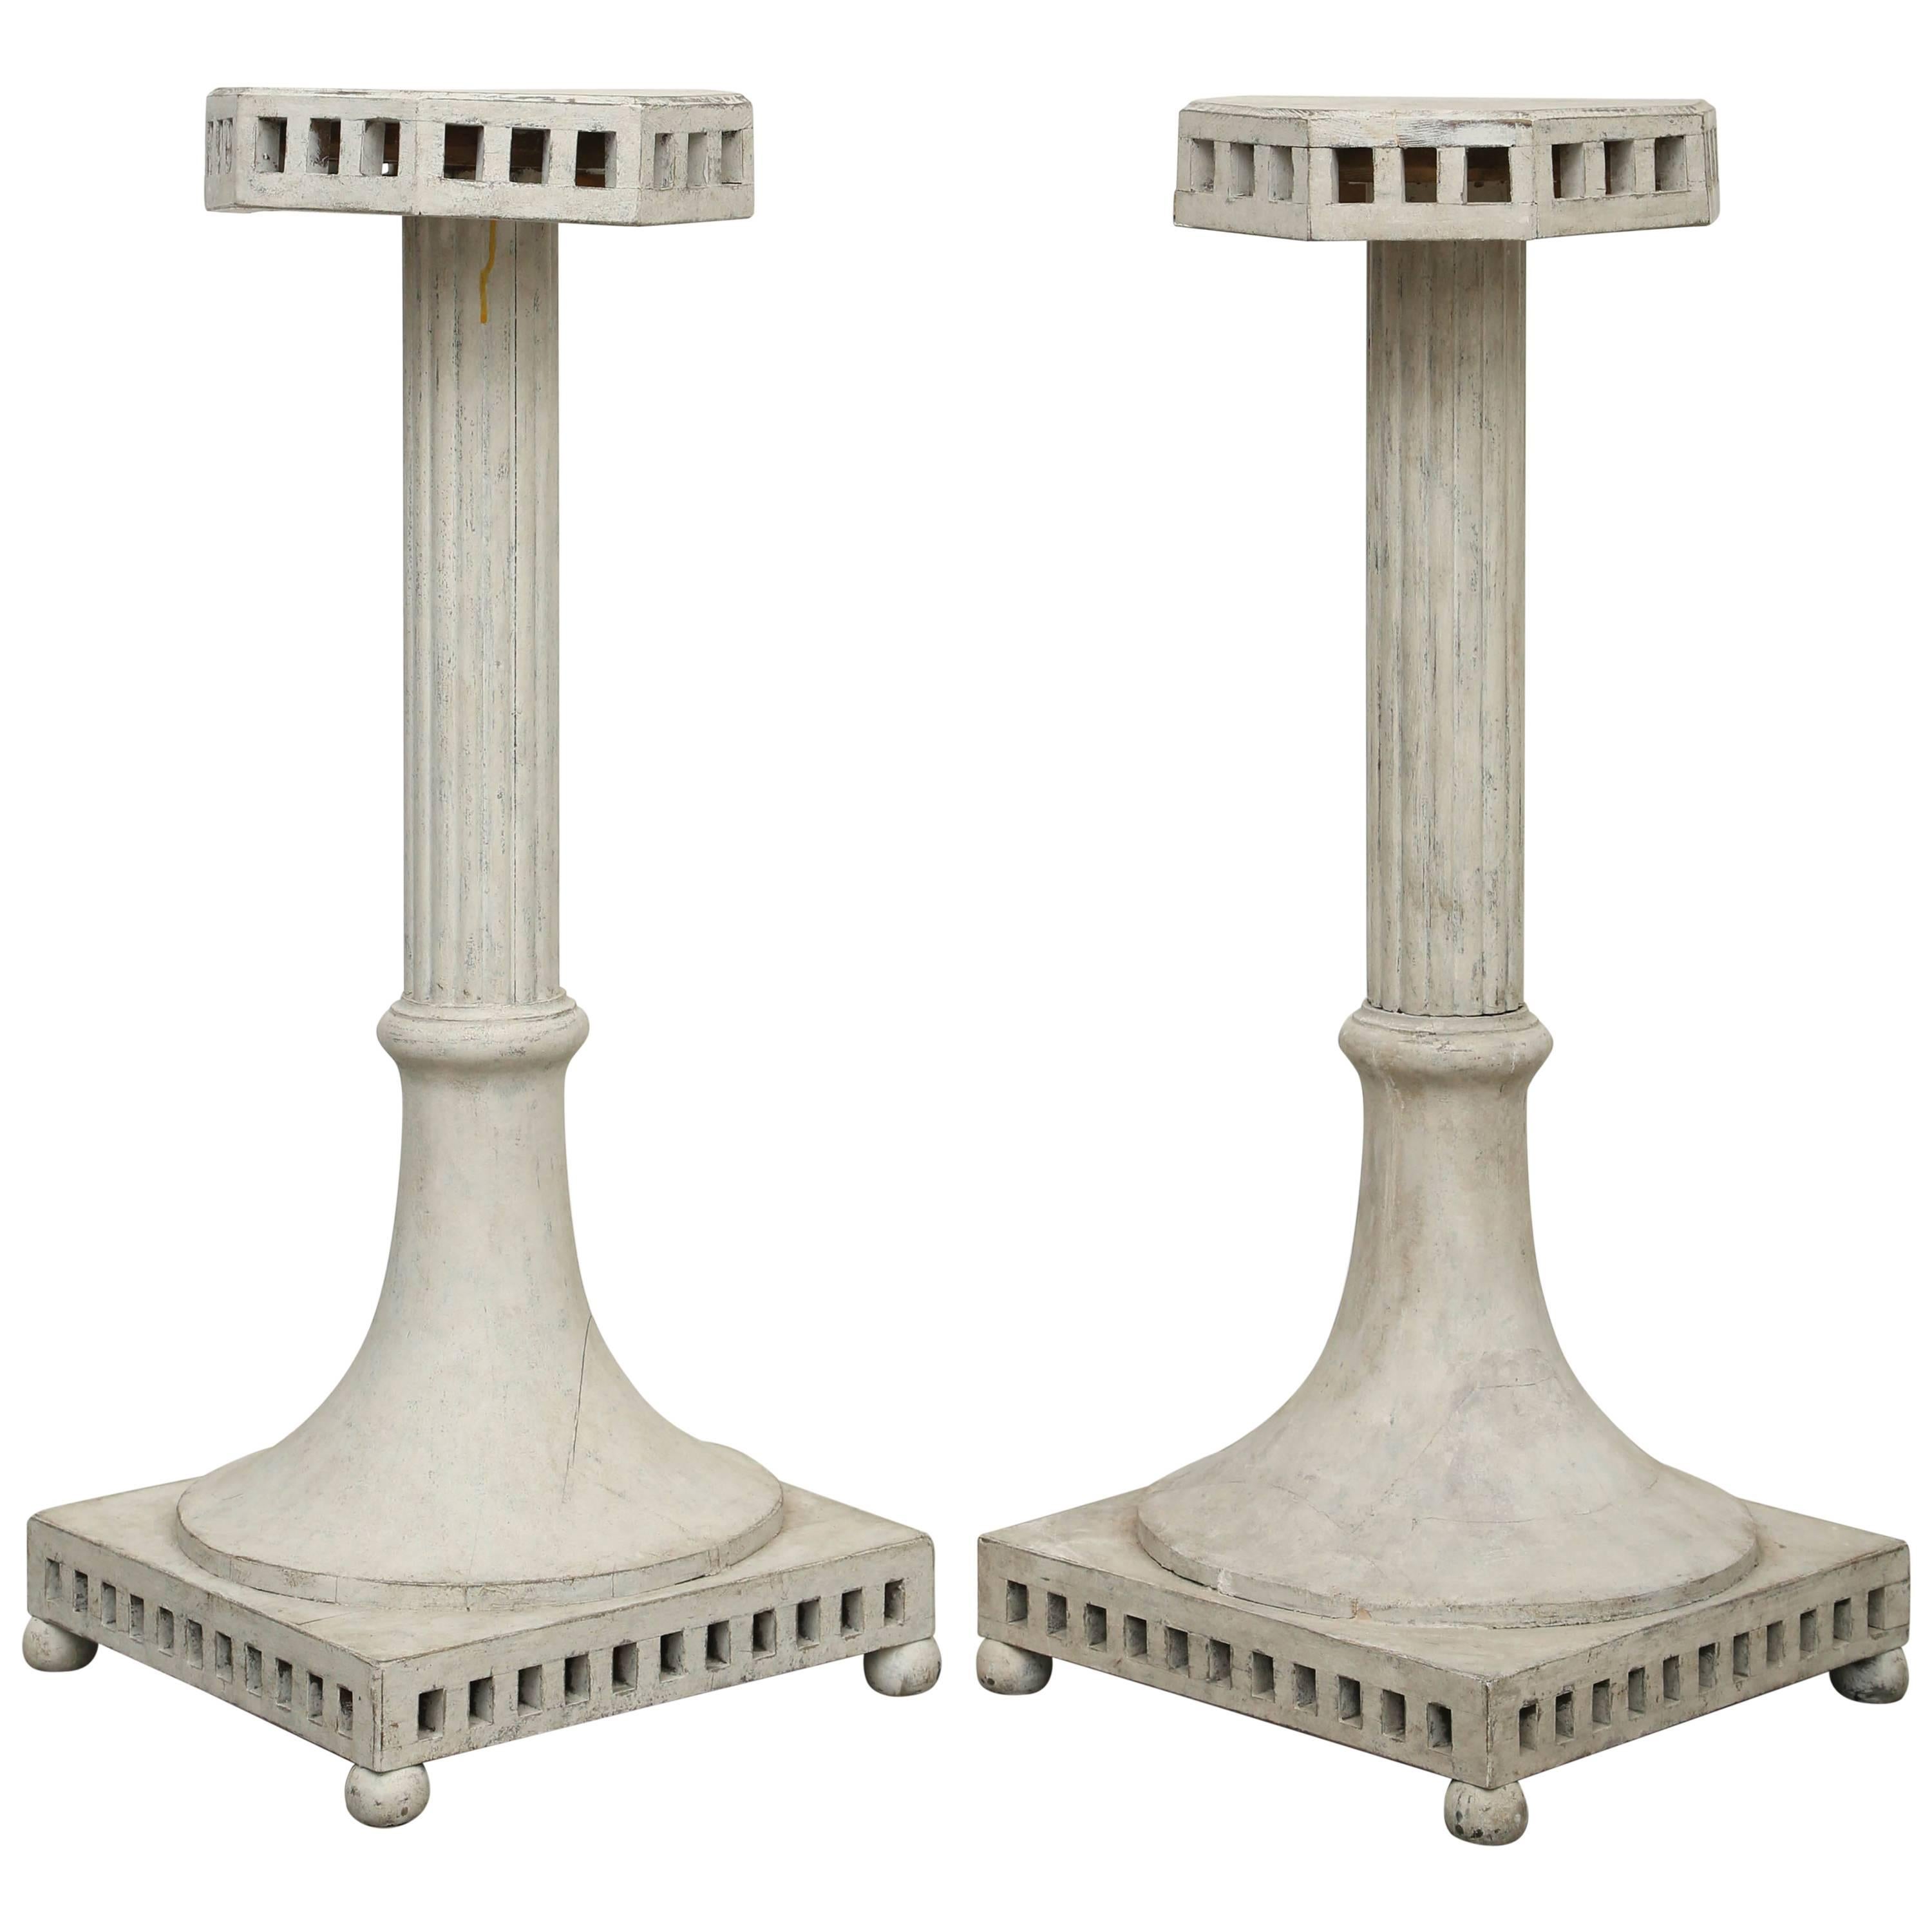 Pair of Antique Swedish Gustavian style Painted Pedestals, Mid-19th Century